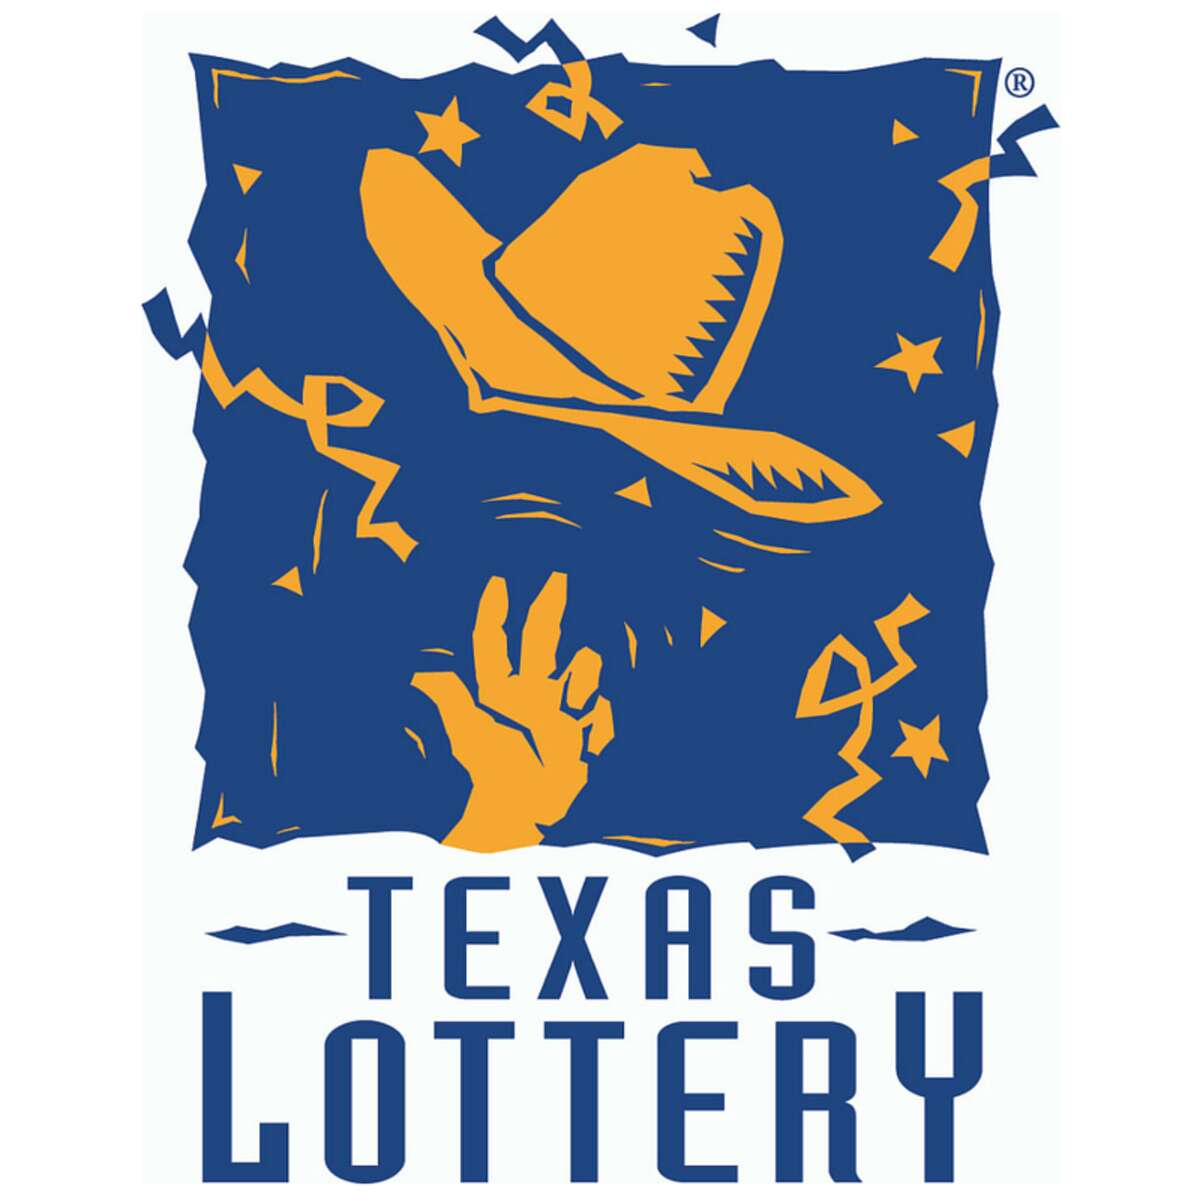 A New Braunfels resident claimed a $2 million prize on Aug. 23, 2022.